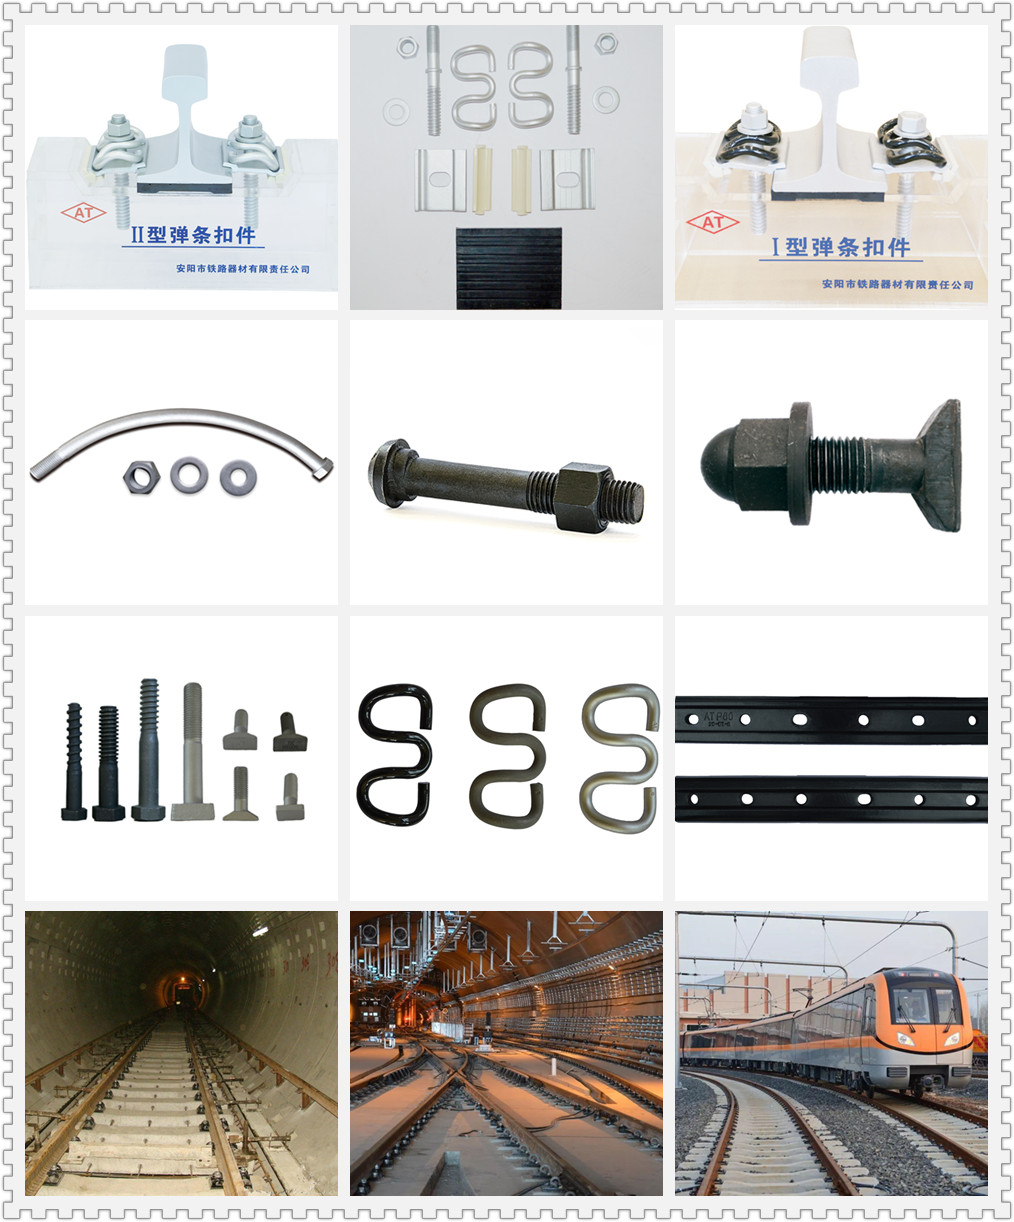 Anyang Railway Equipment Co., Ltd(AT) provided Rail Fasteners, Rail Fastening Systems, Joint Bars, Track Bolts for Nanjing Metro(Subway)